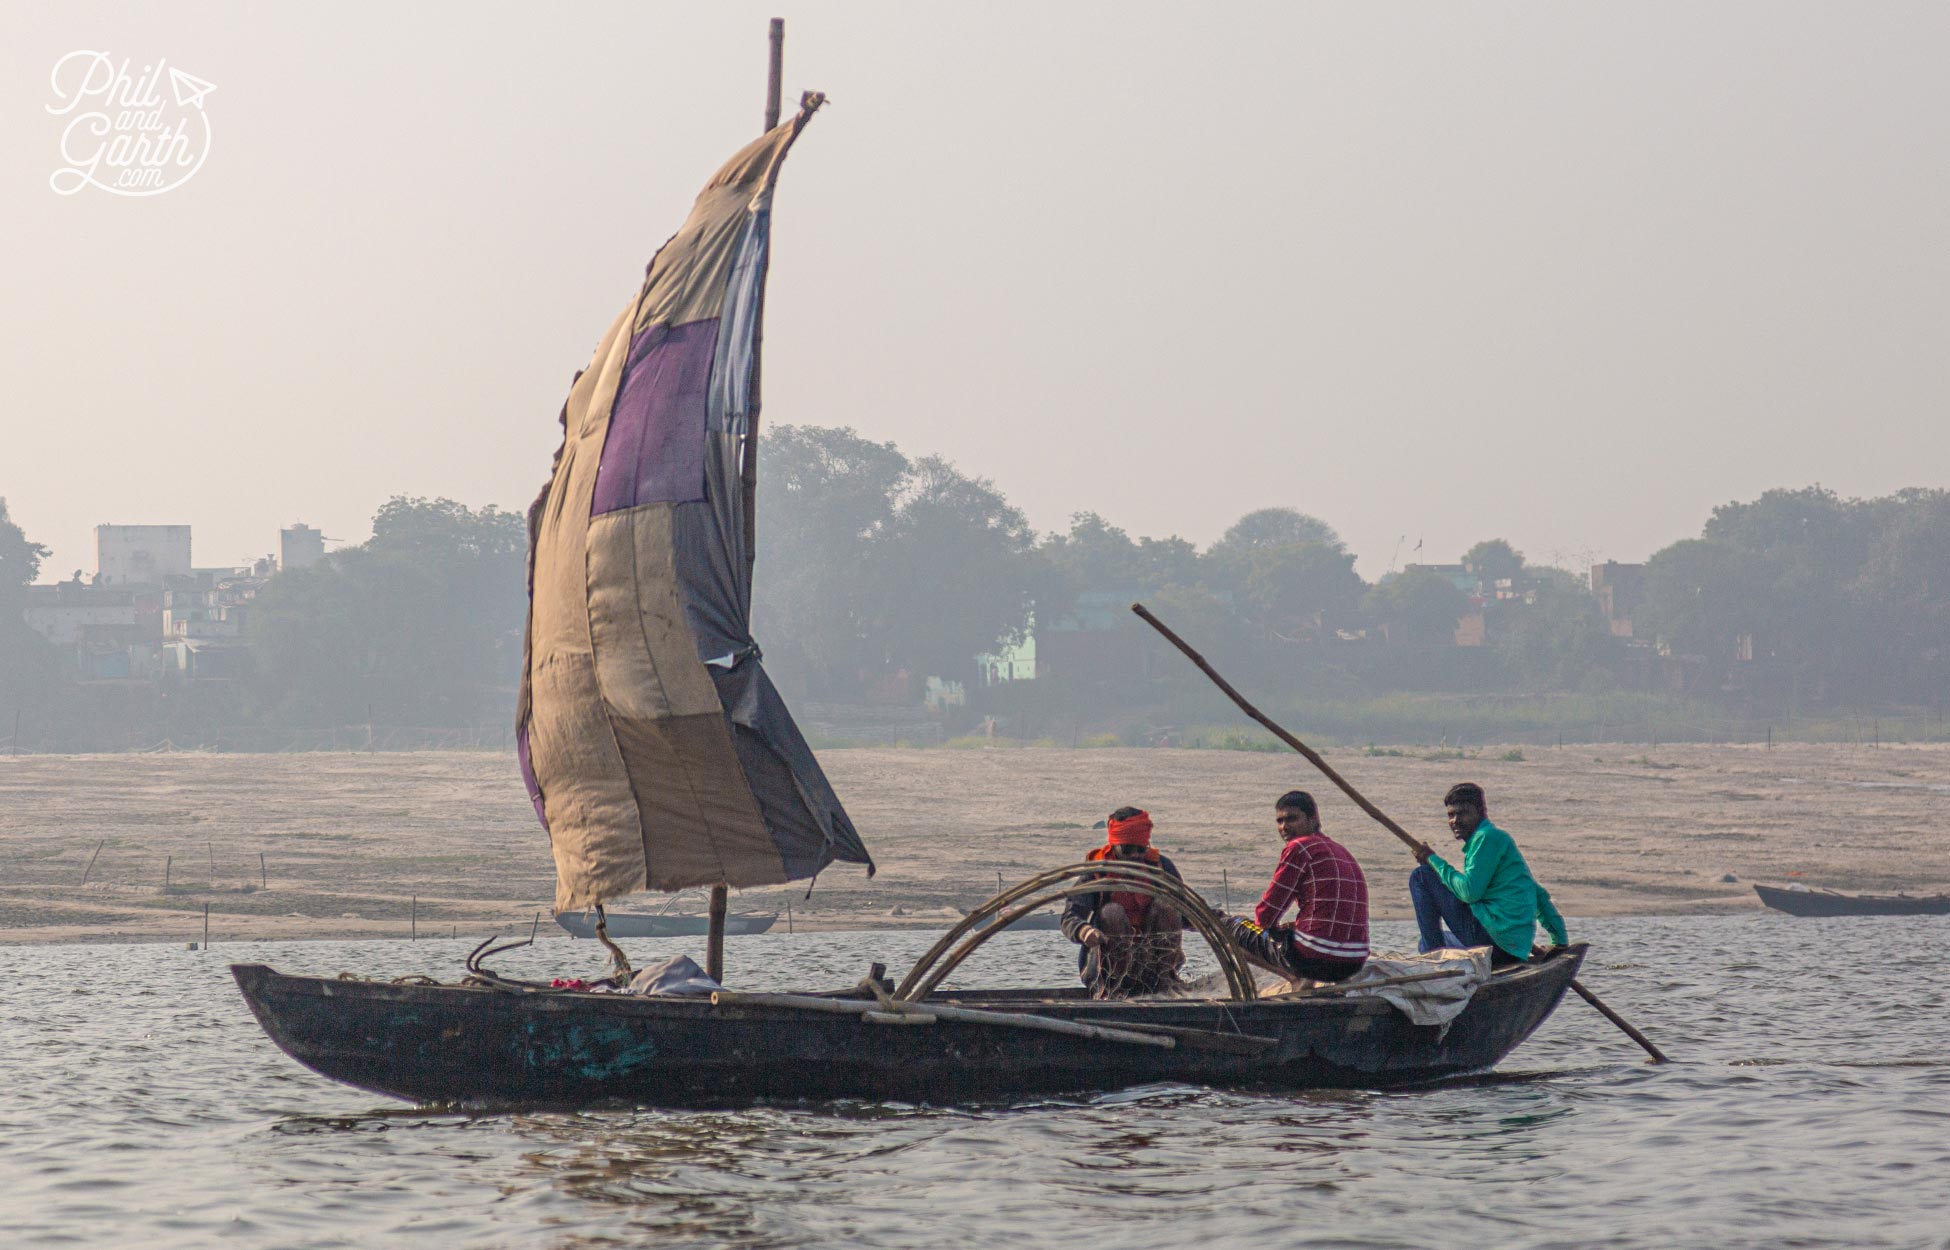 Passing some fishermen on the River Ganges